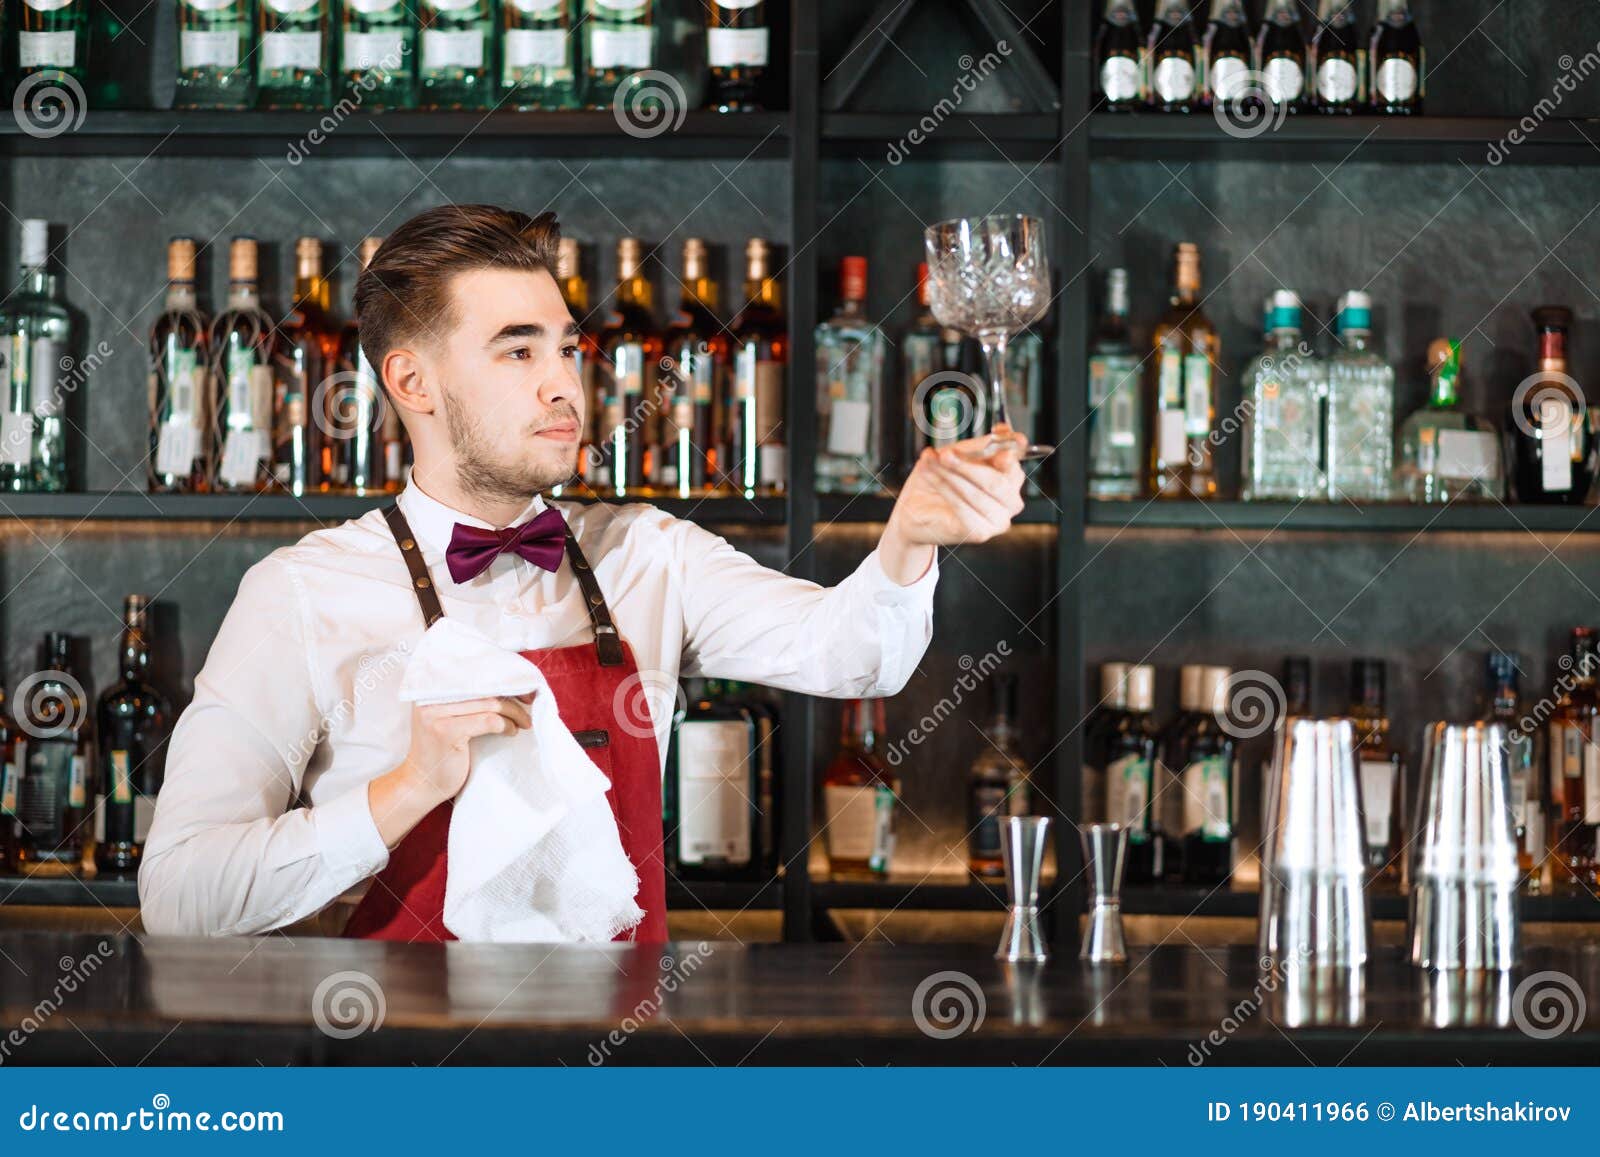 Bartender Standing at Bar Counter, Cleaning Glasses with Towel Stock Photo  - Image of portrait, informal: 190411966